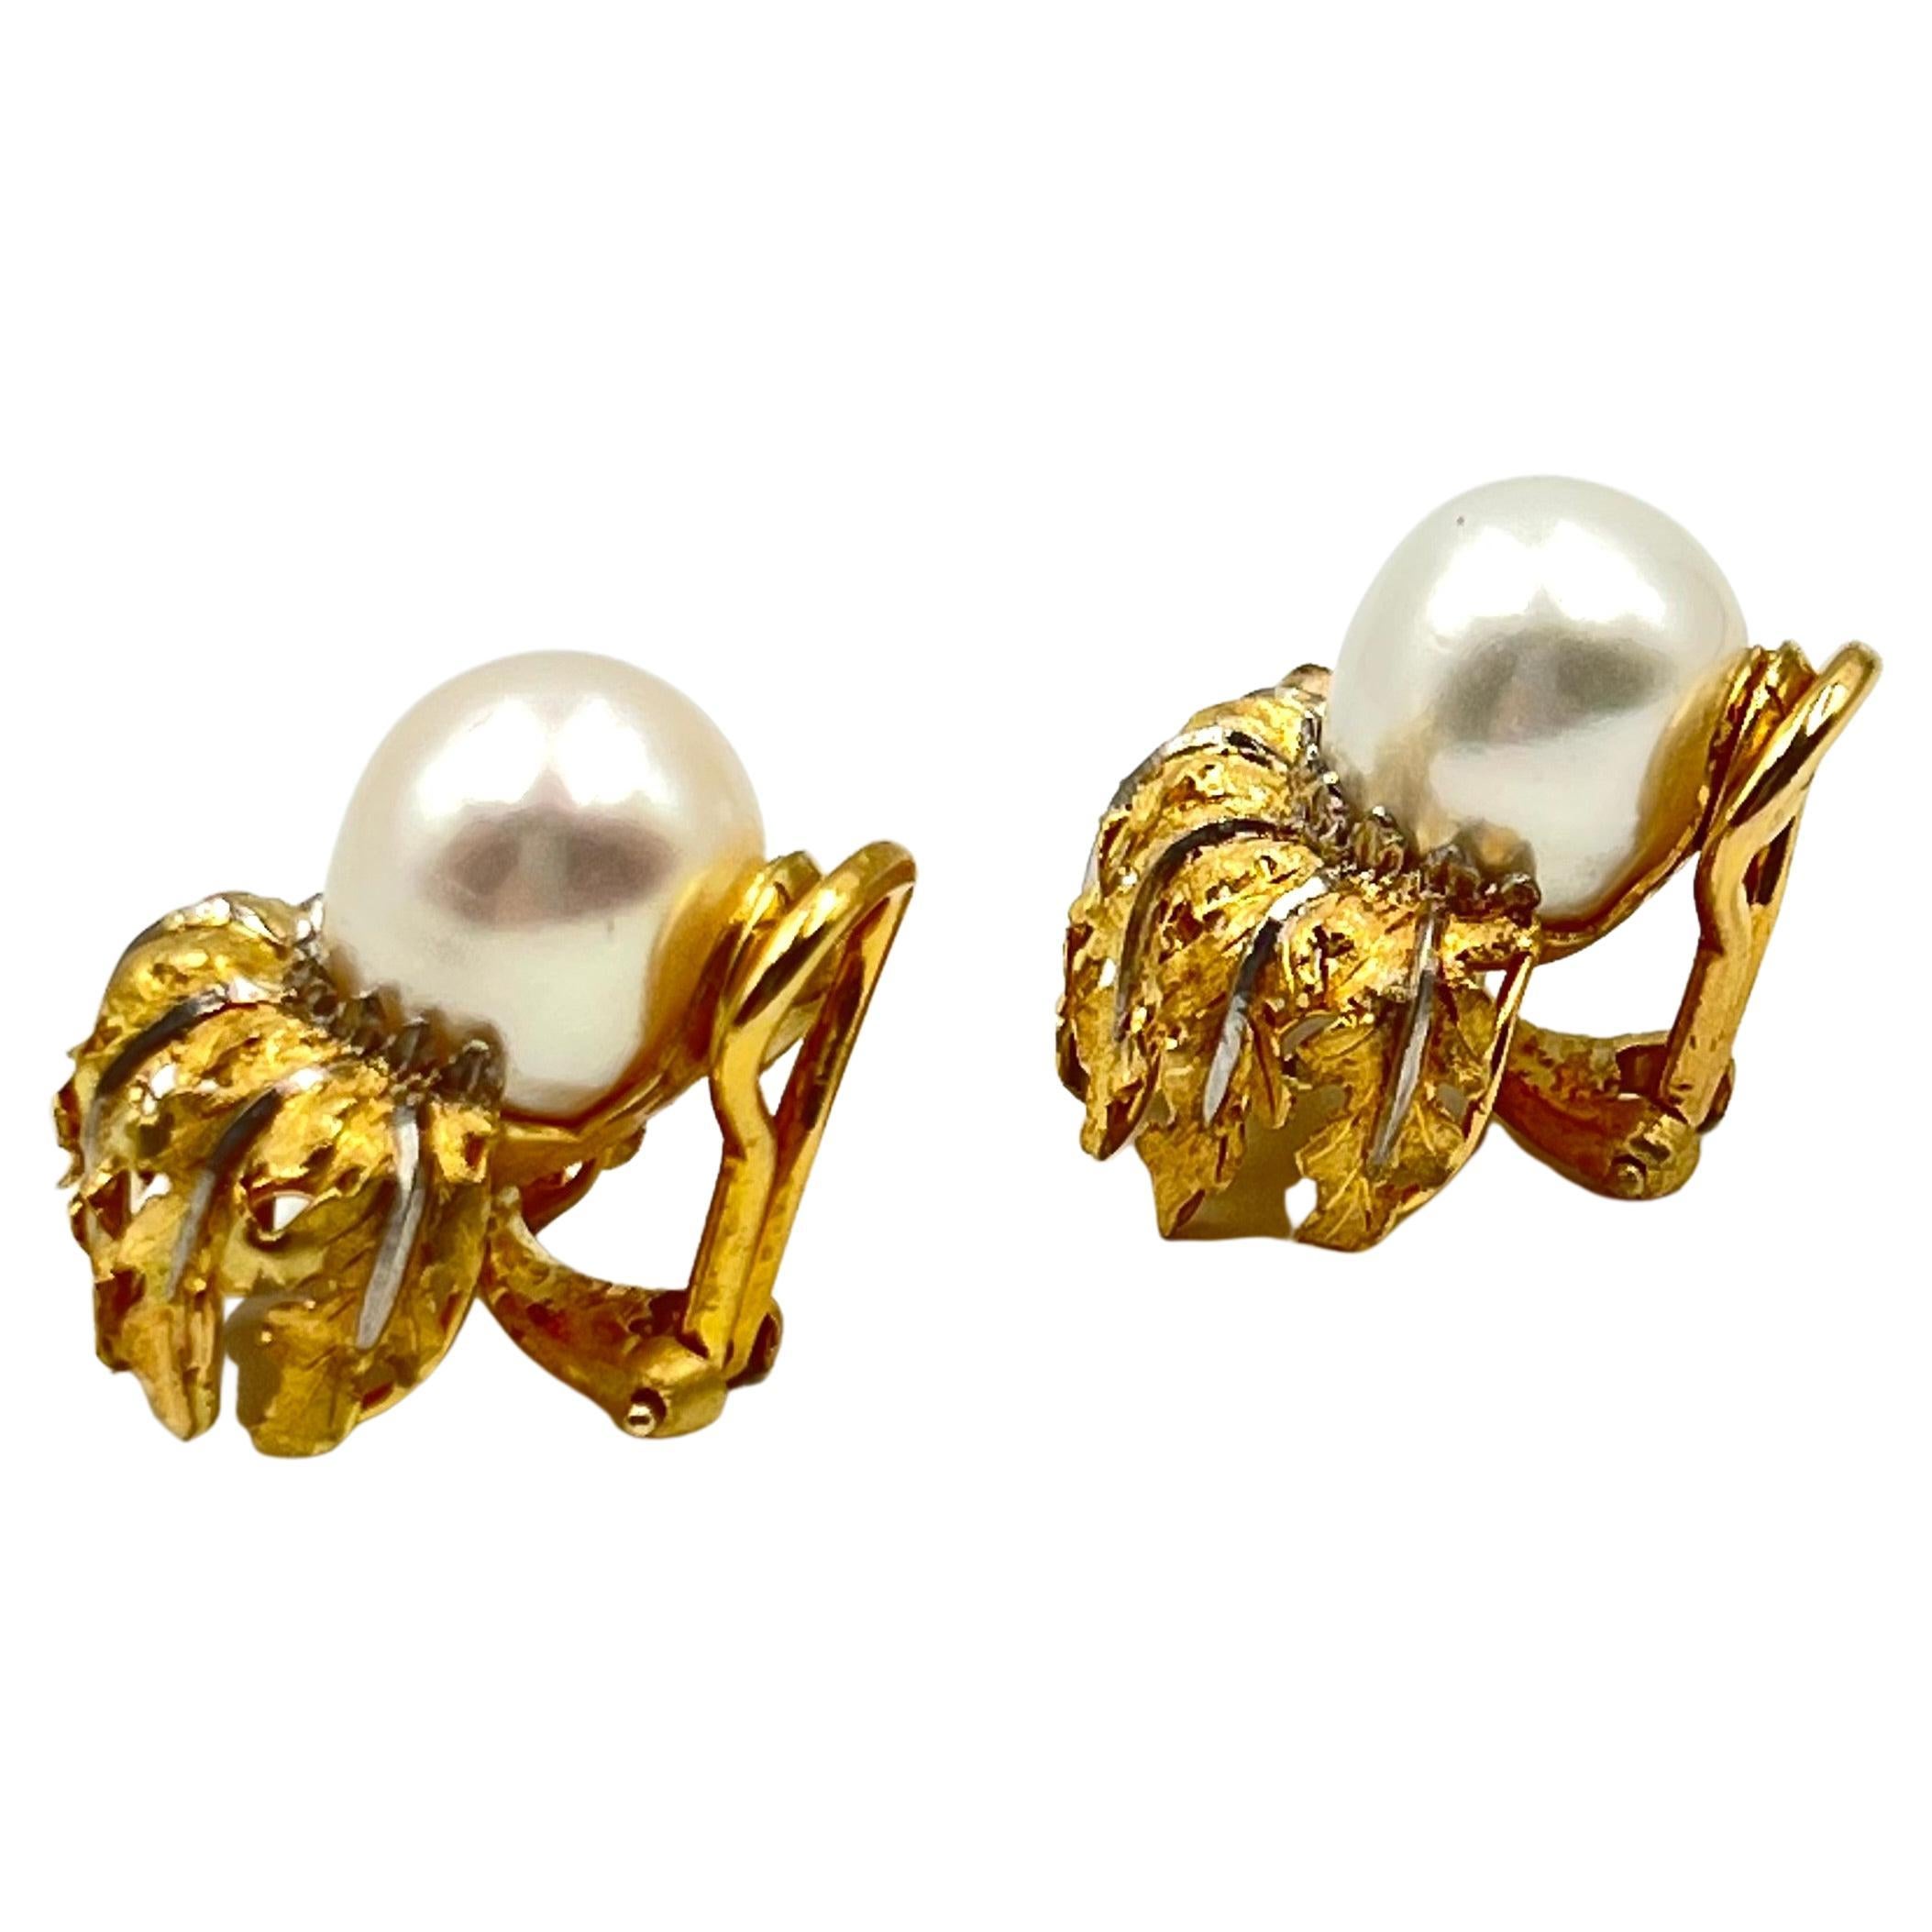 Buccellati 18kt yellow brushed gold leaf design.  Set on top of each is a South Sea cultured pearl measuring approx. 10.48-10.60mm.  0.9